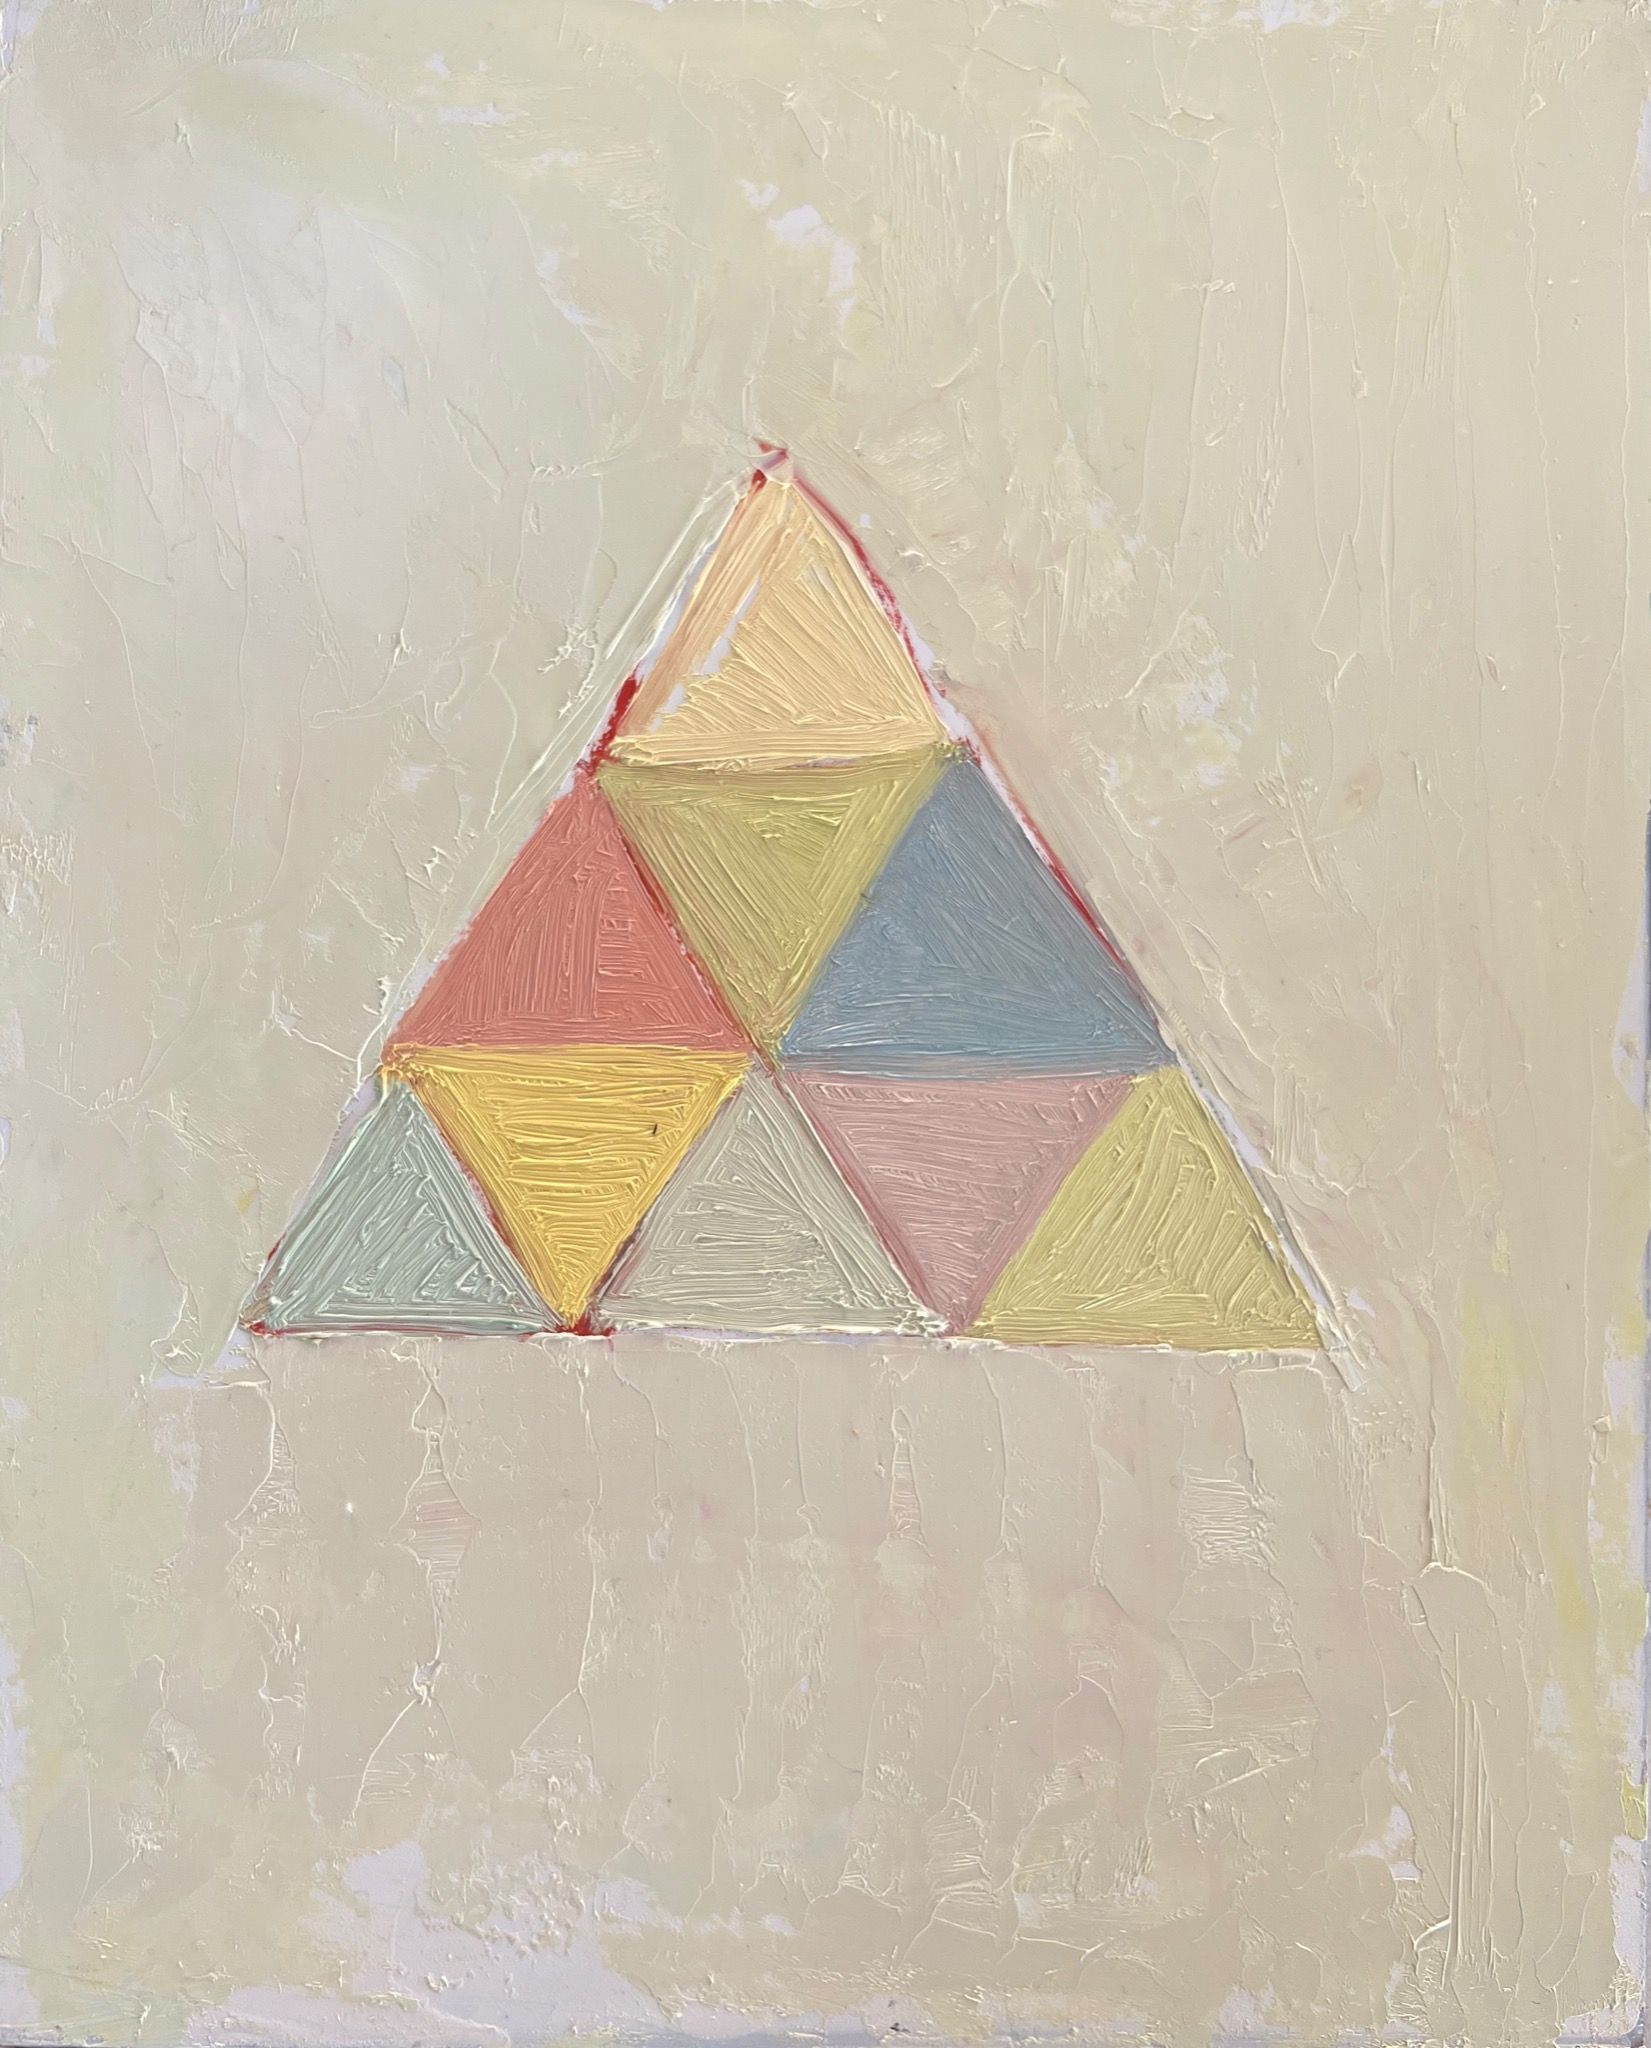 A painting of of a triangle subdivided into 9 traingles in pink, yellow, green and grey tones.